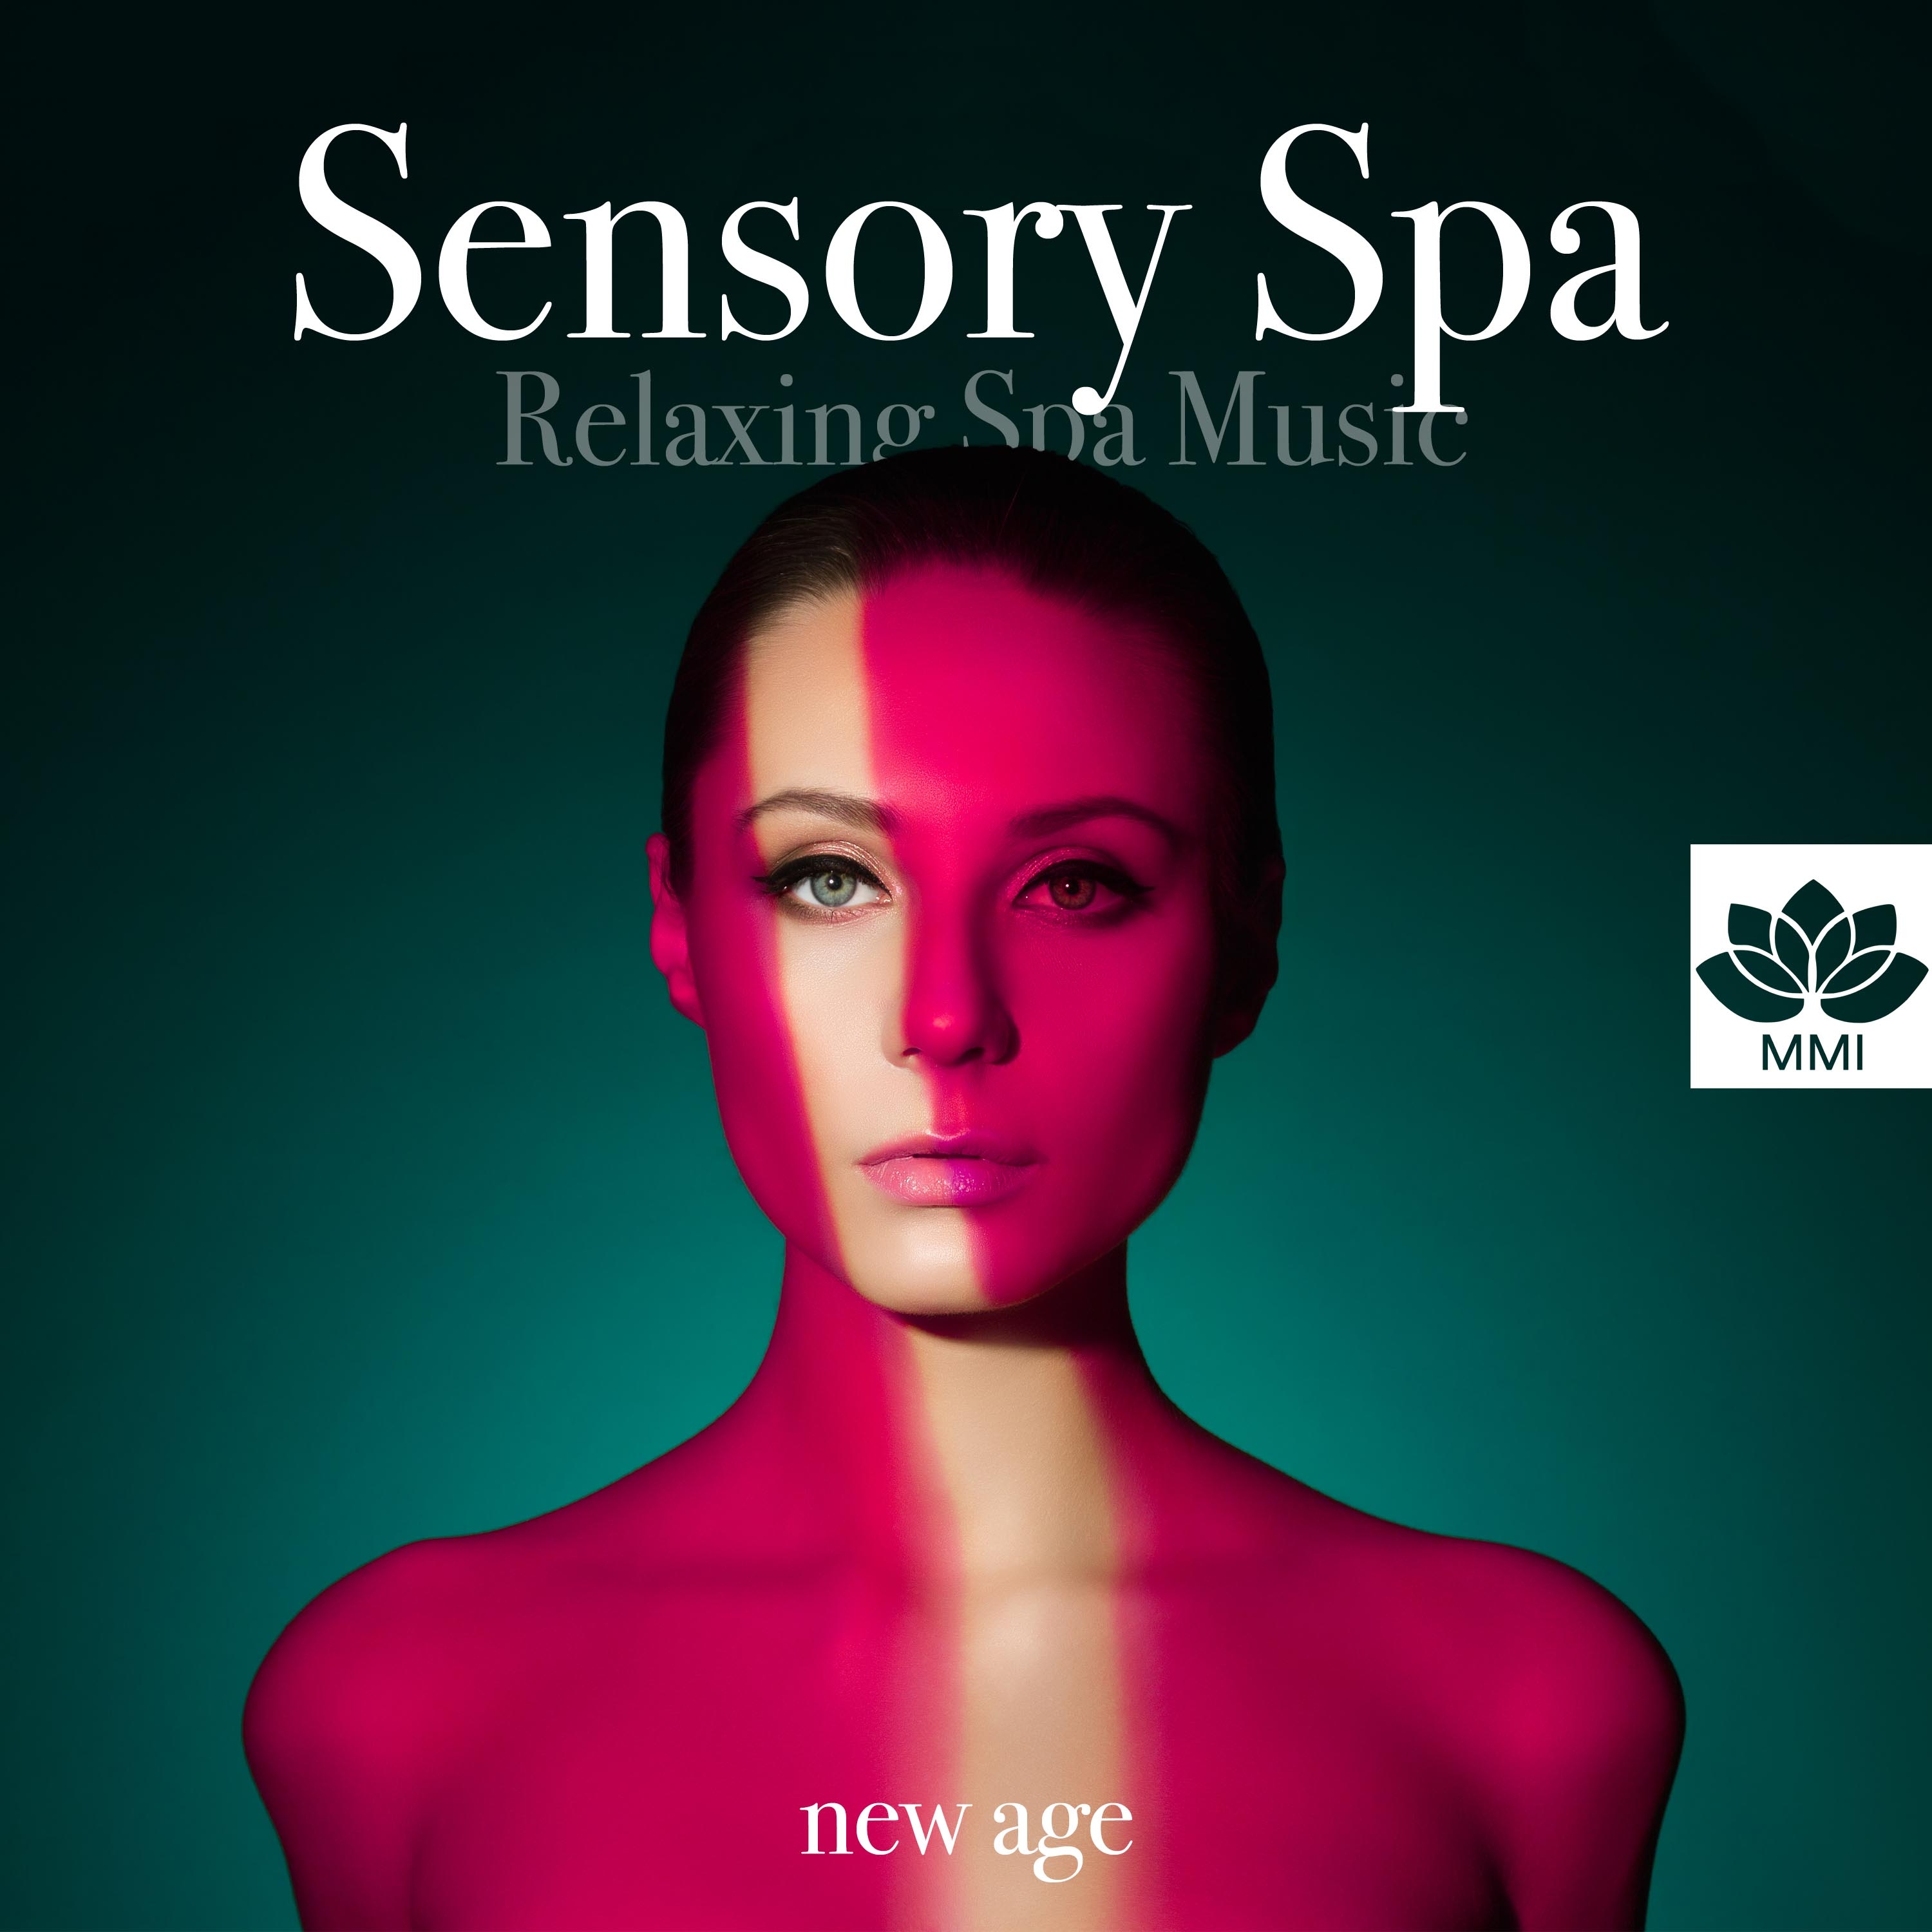 Sensory Spa: Relaxing Spa Music for Massage, Sauna, Thermal Pool, Deep Relaxation